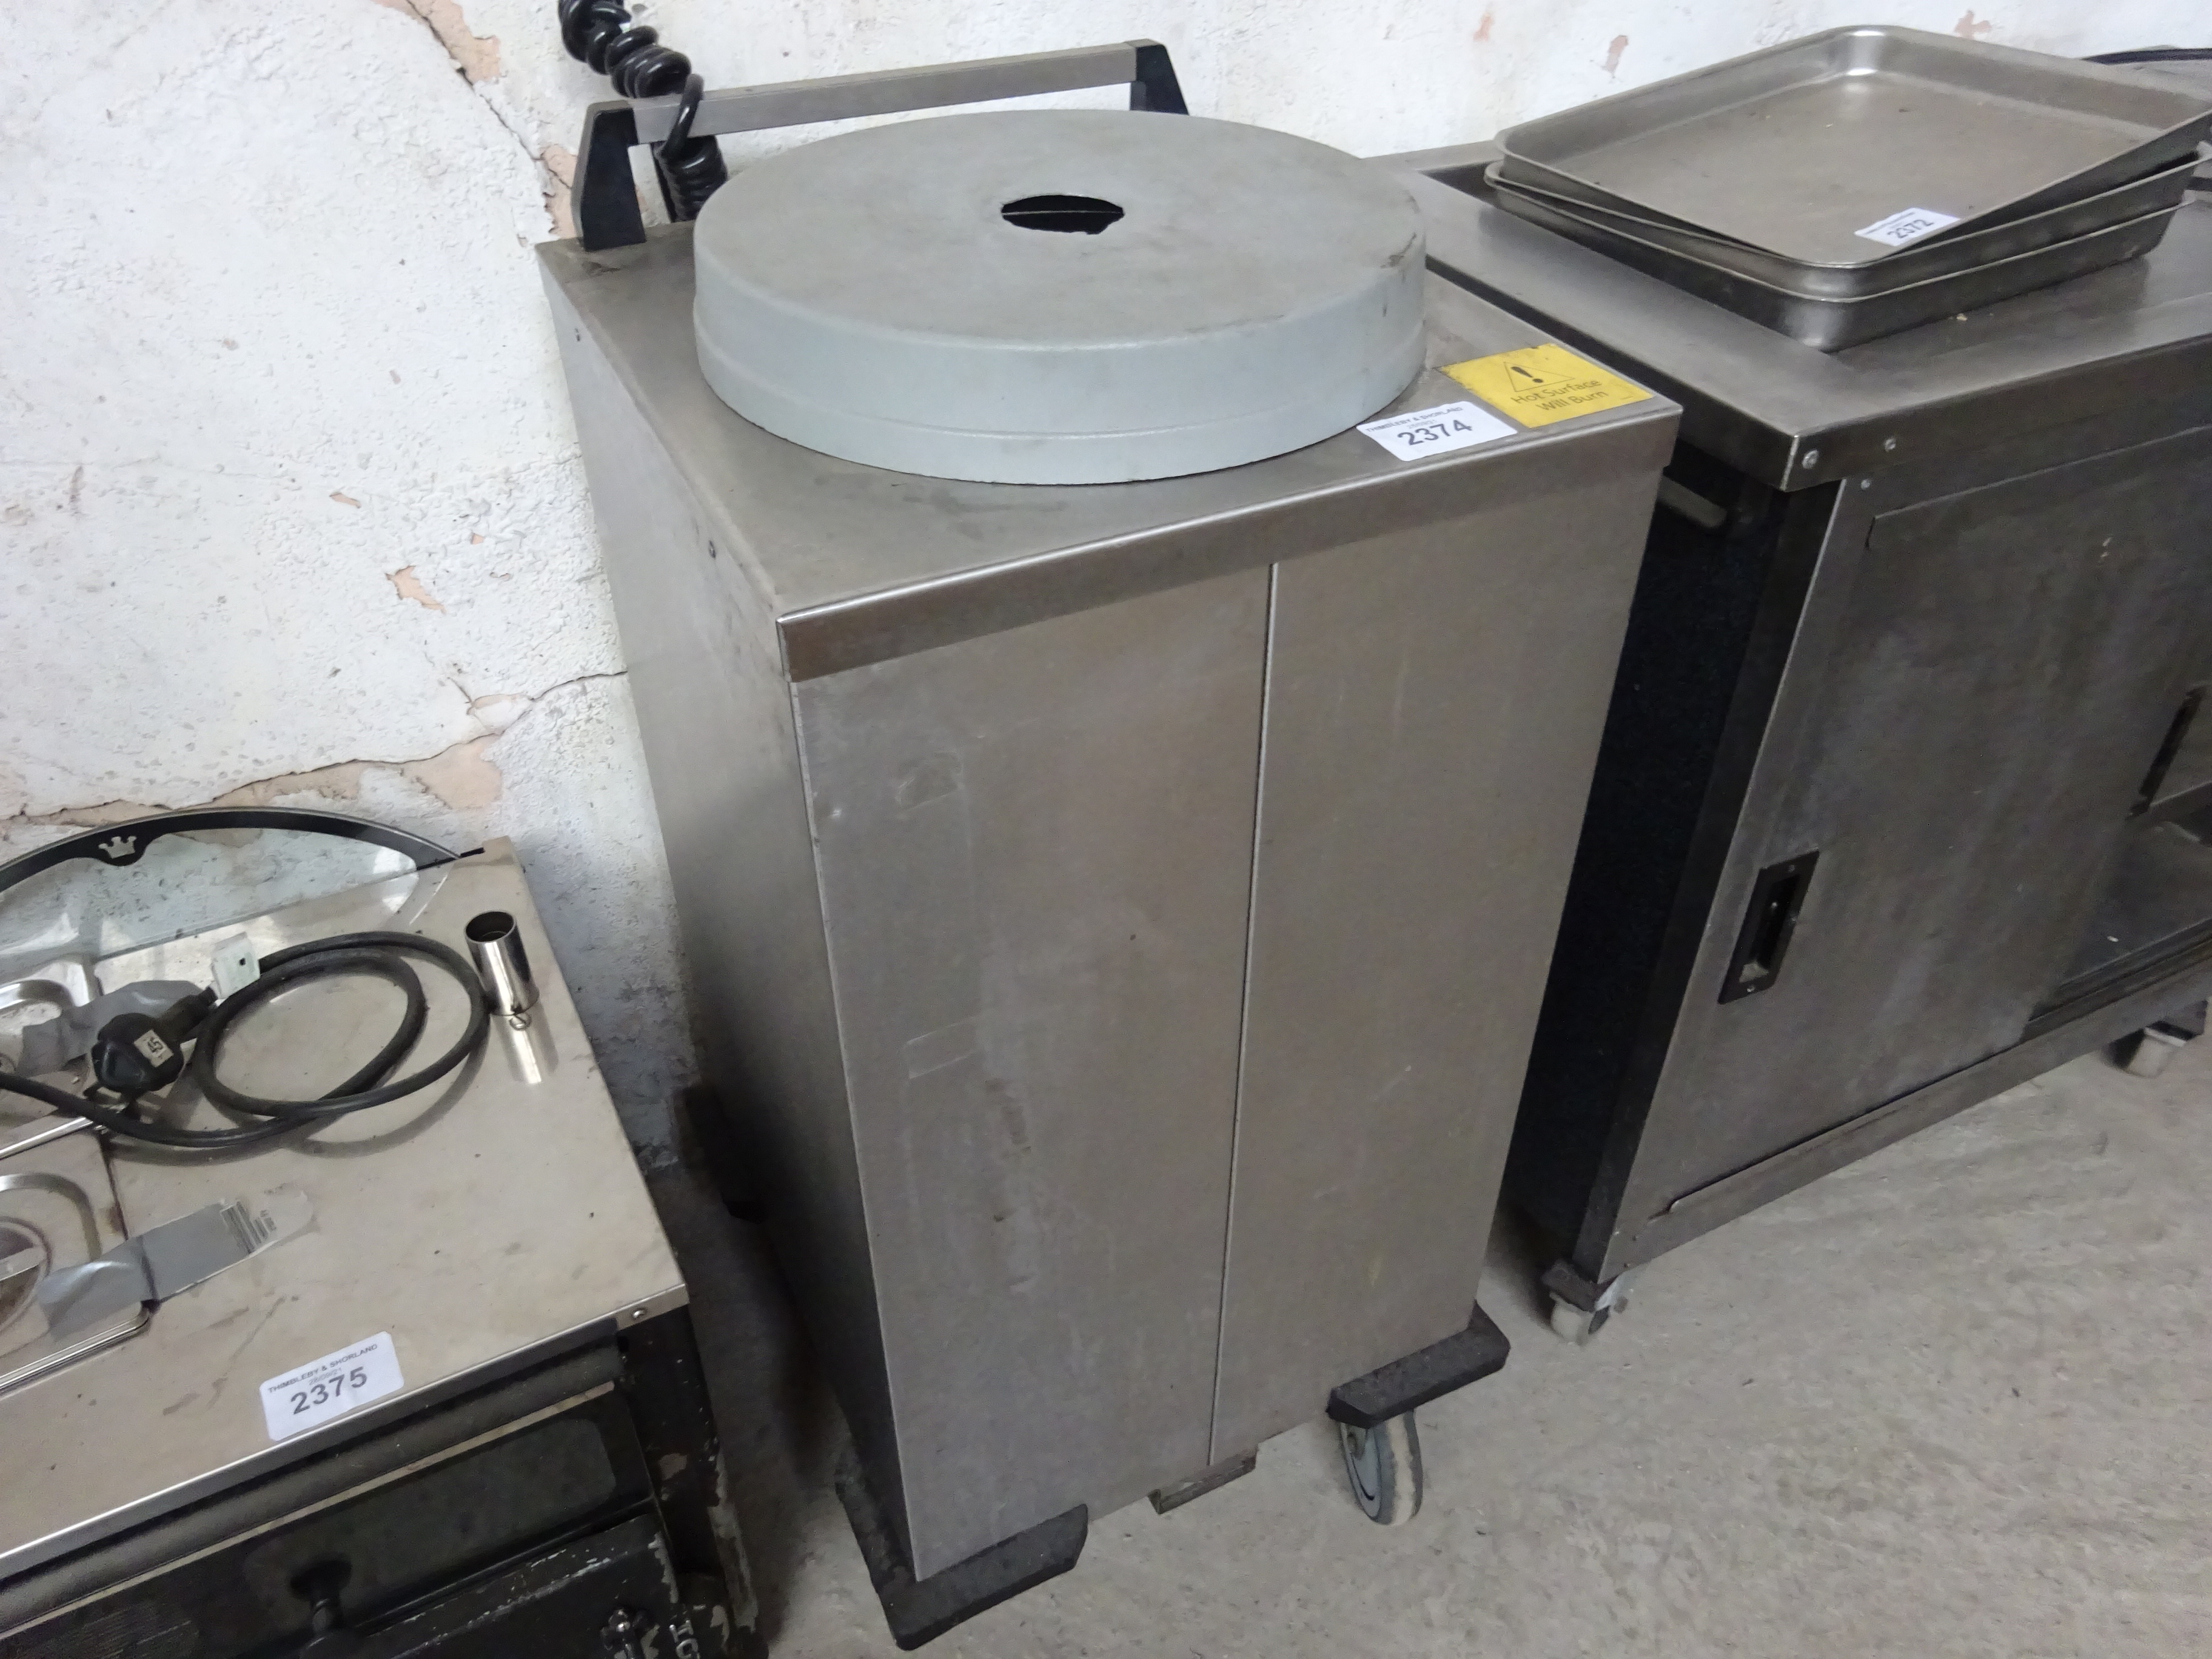 Electric plate lowerator